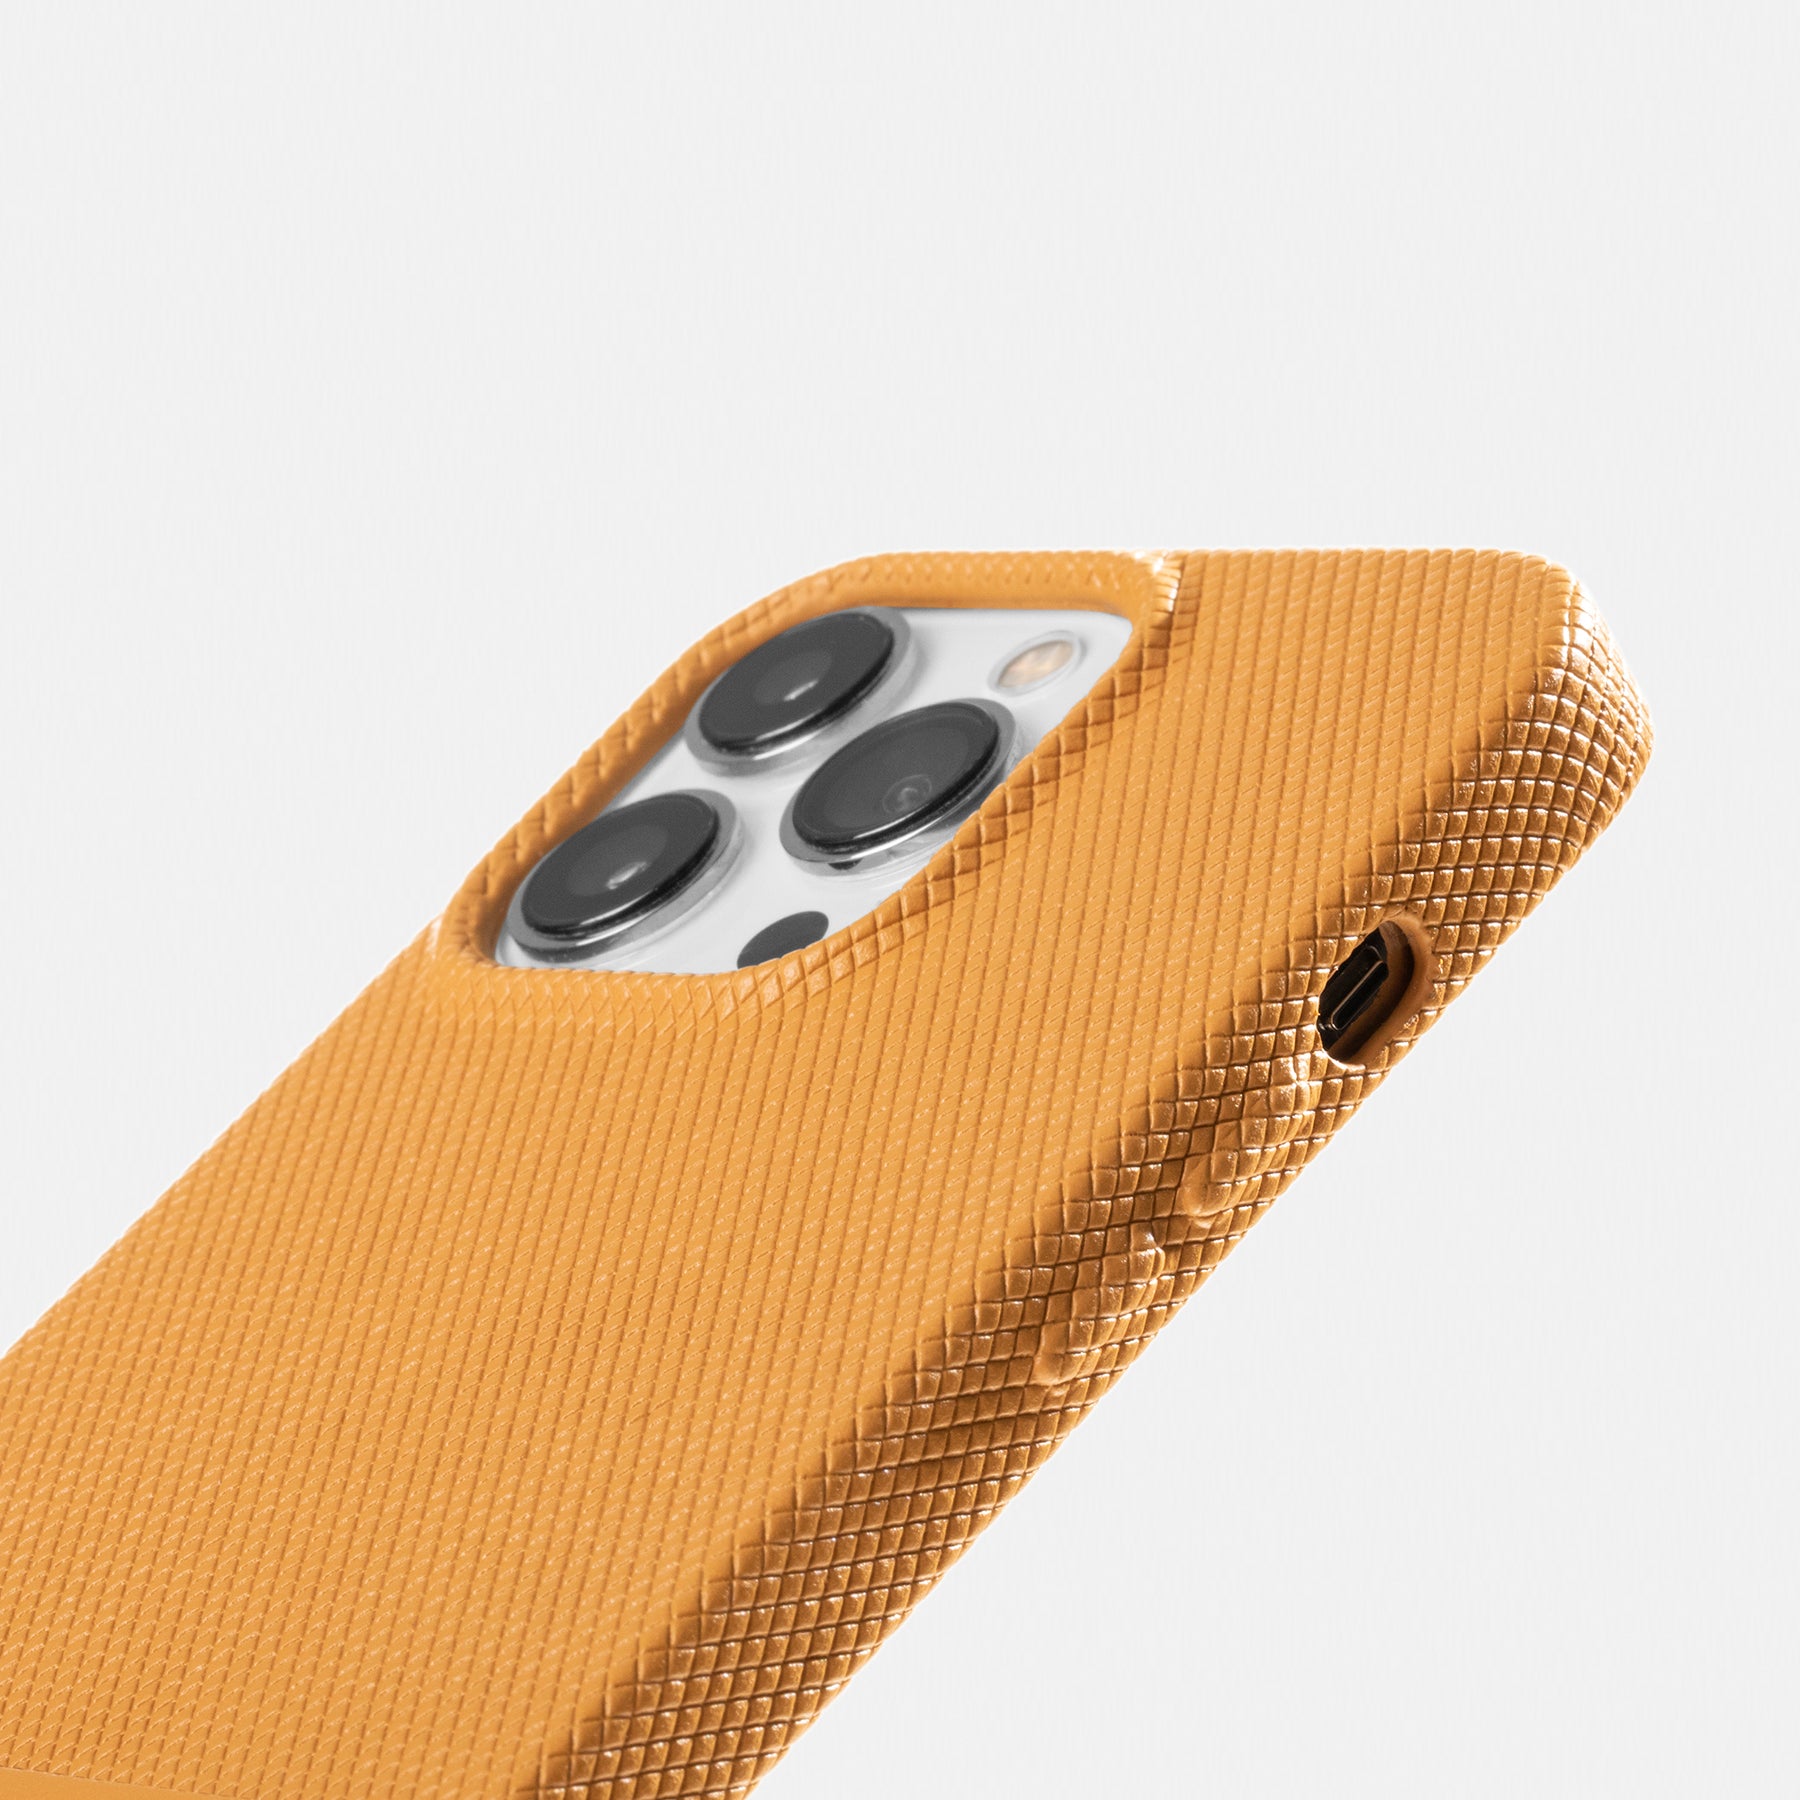 (Re)Classic Case for iPhone 15